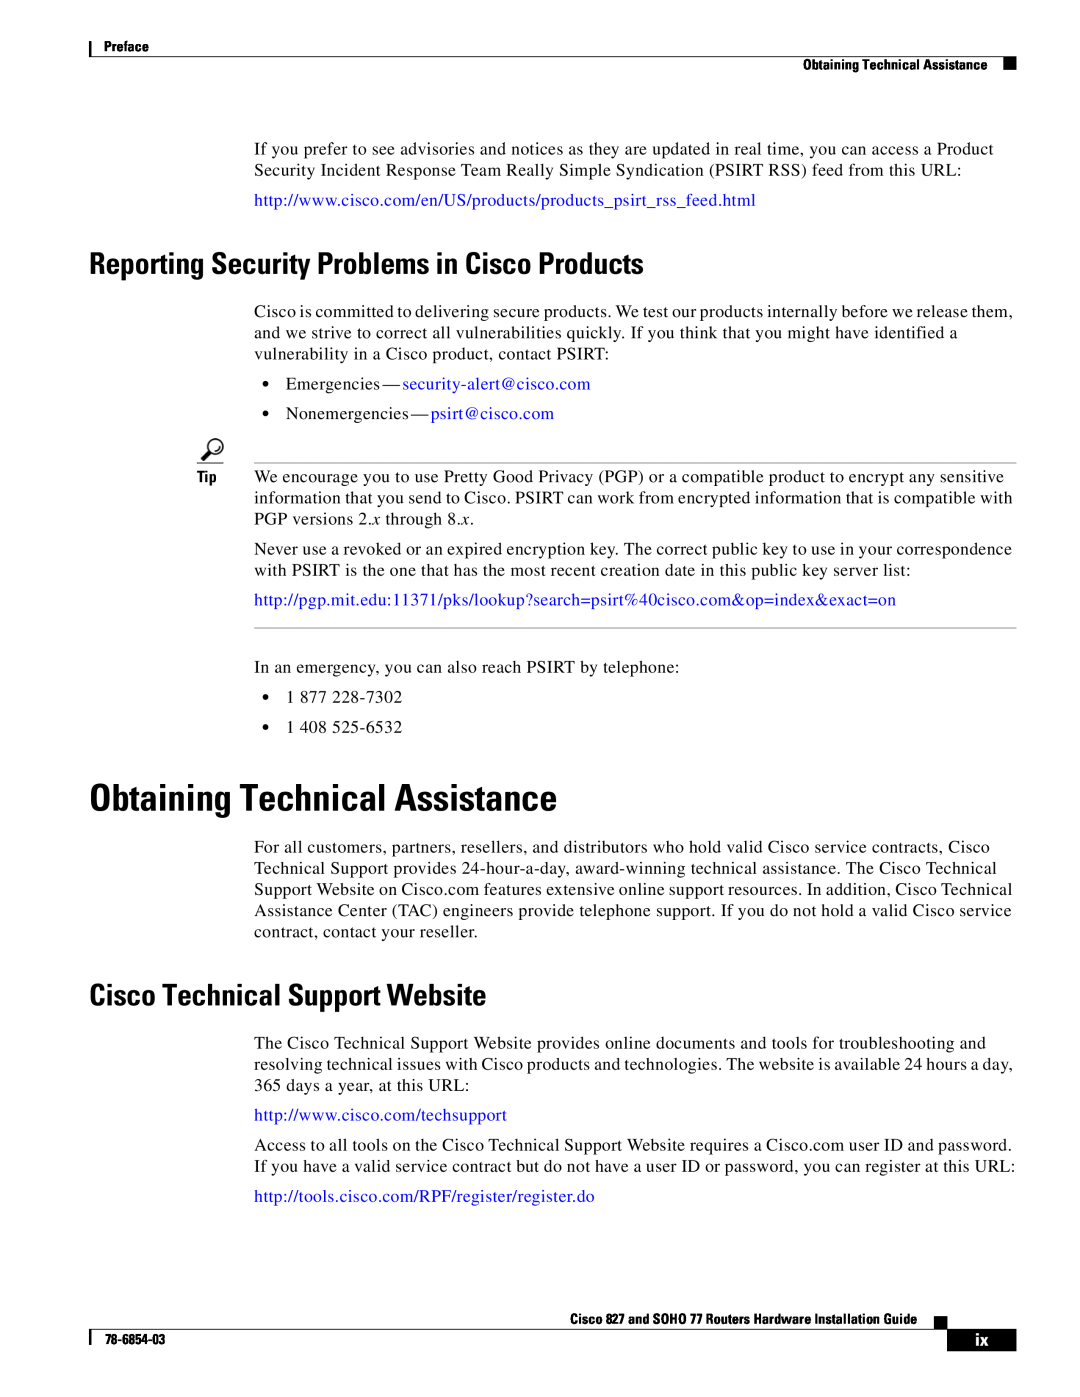 Cisco Systems SOHO 77 manual Obtaining Technical Assistance, Reporting Security Problems in Cisco Products 